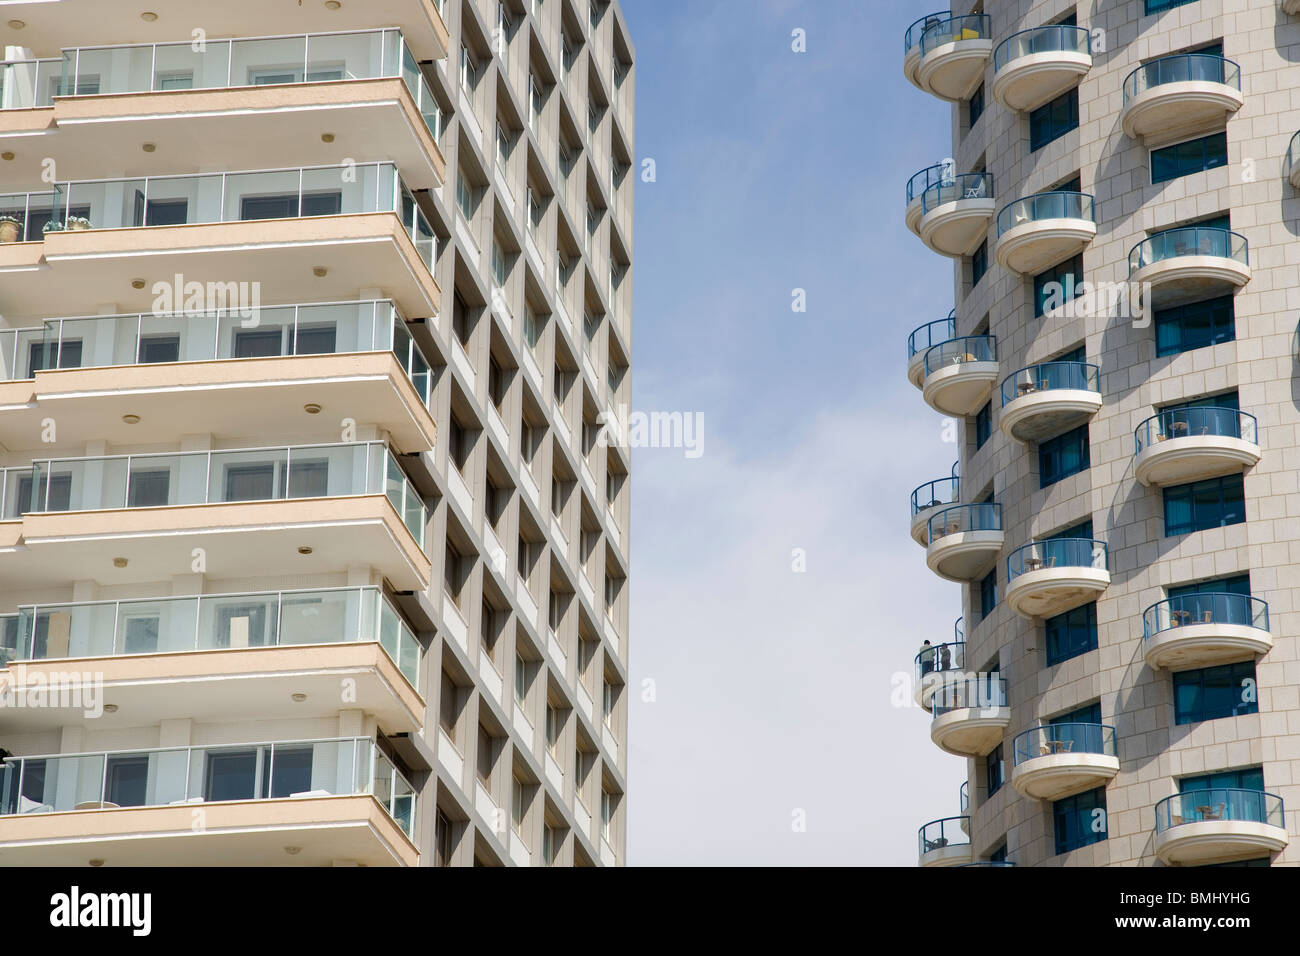 Tel Aviv Seafront Architceture - high rise buildings- Isrotel on right Stock Photo